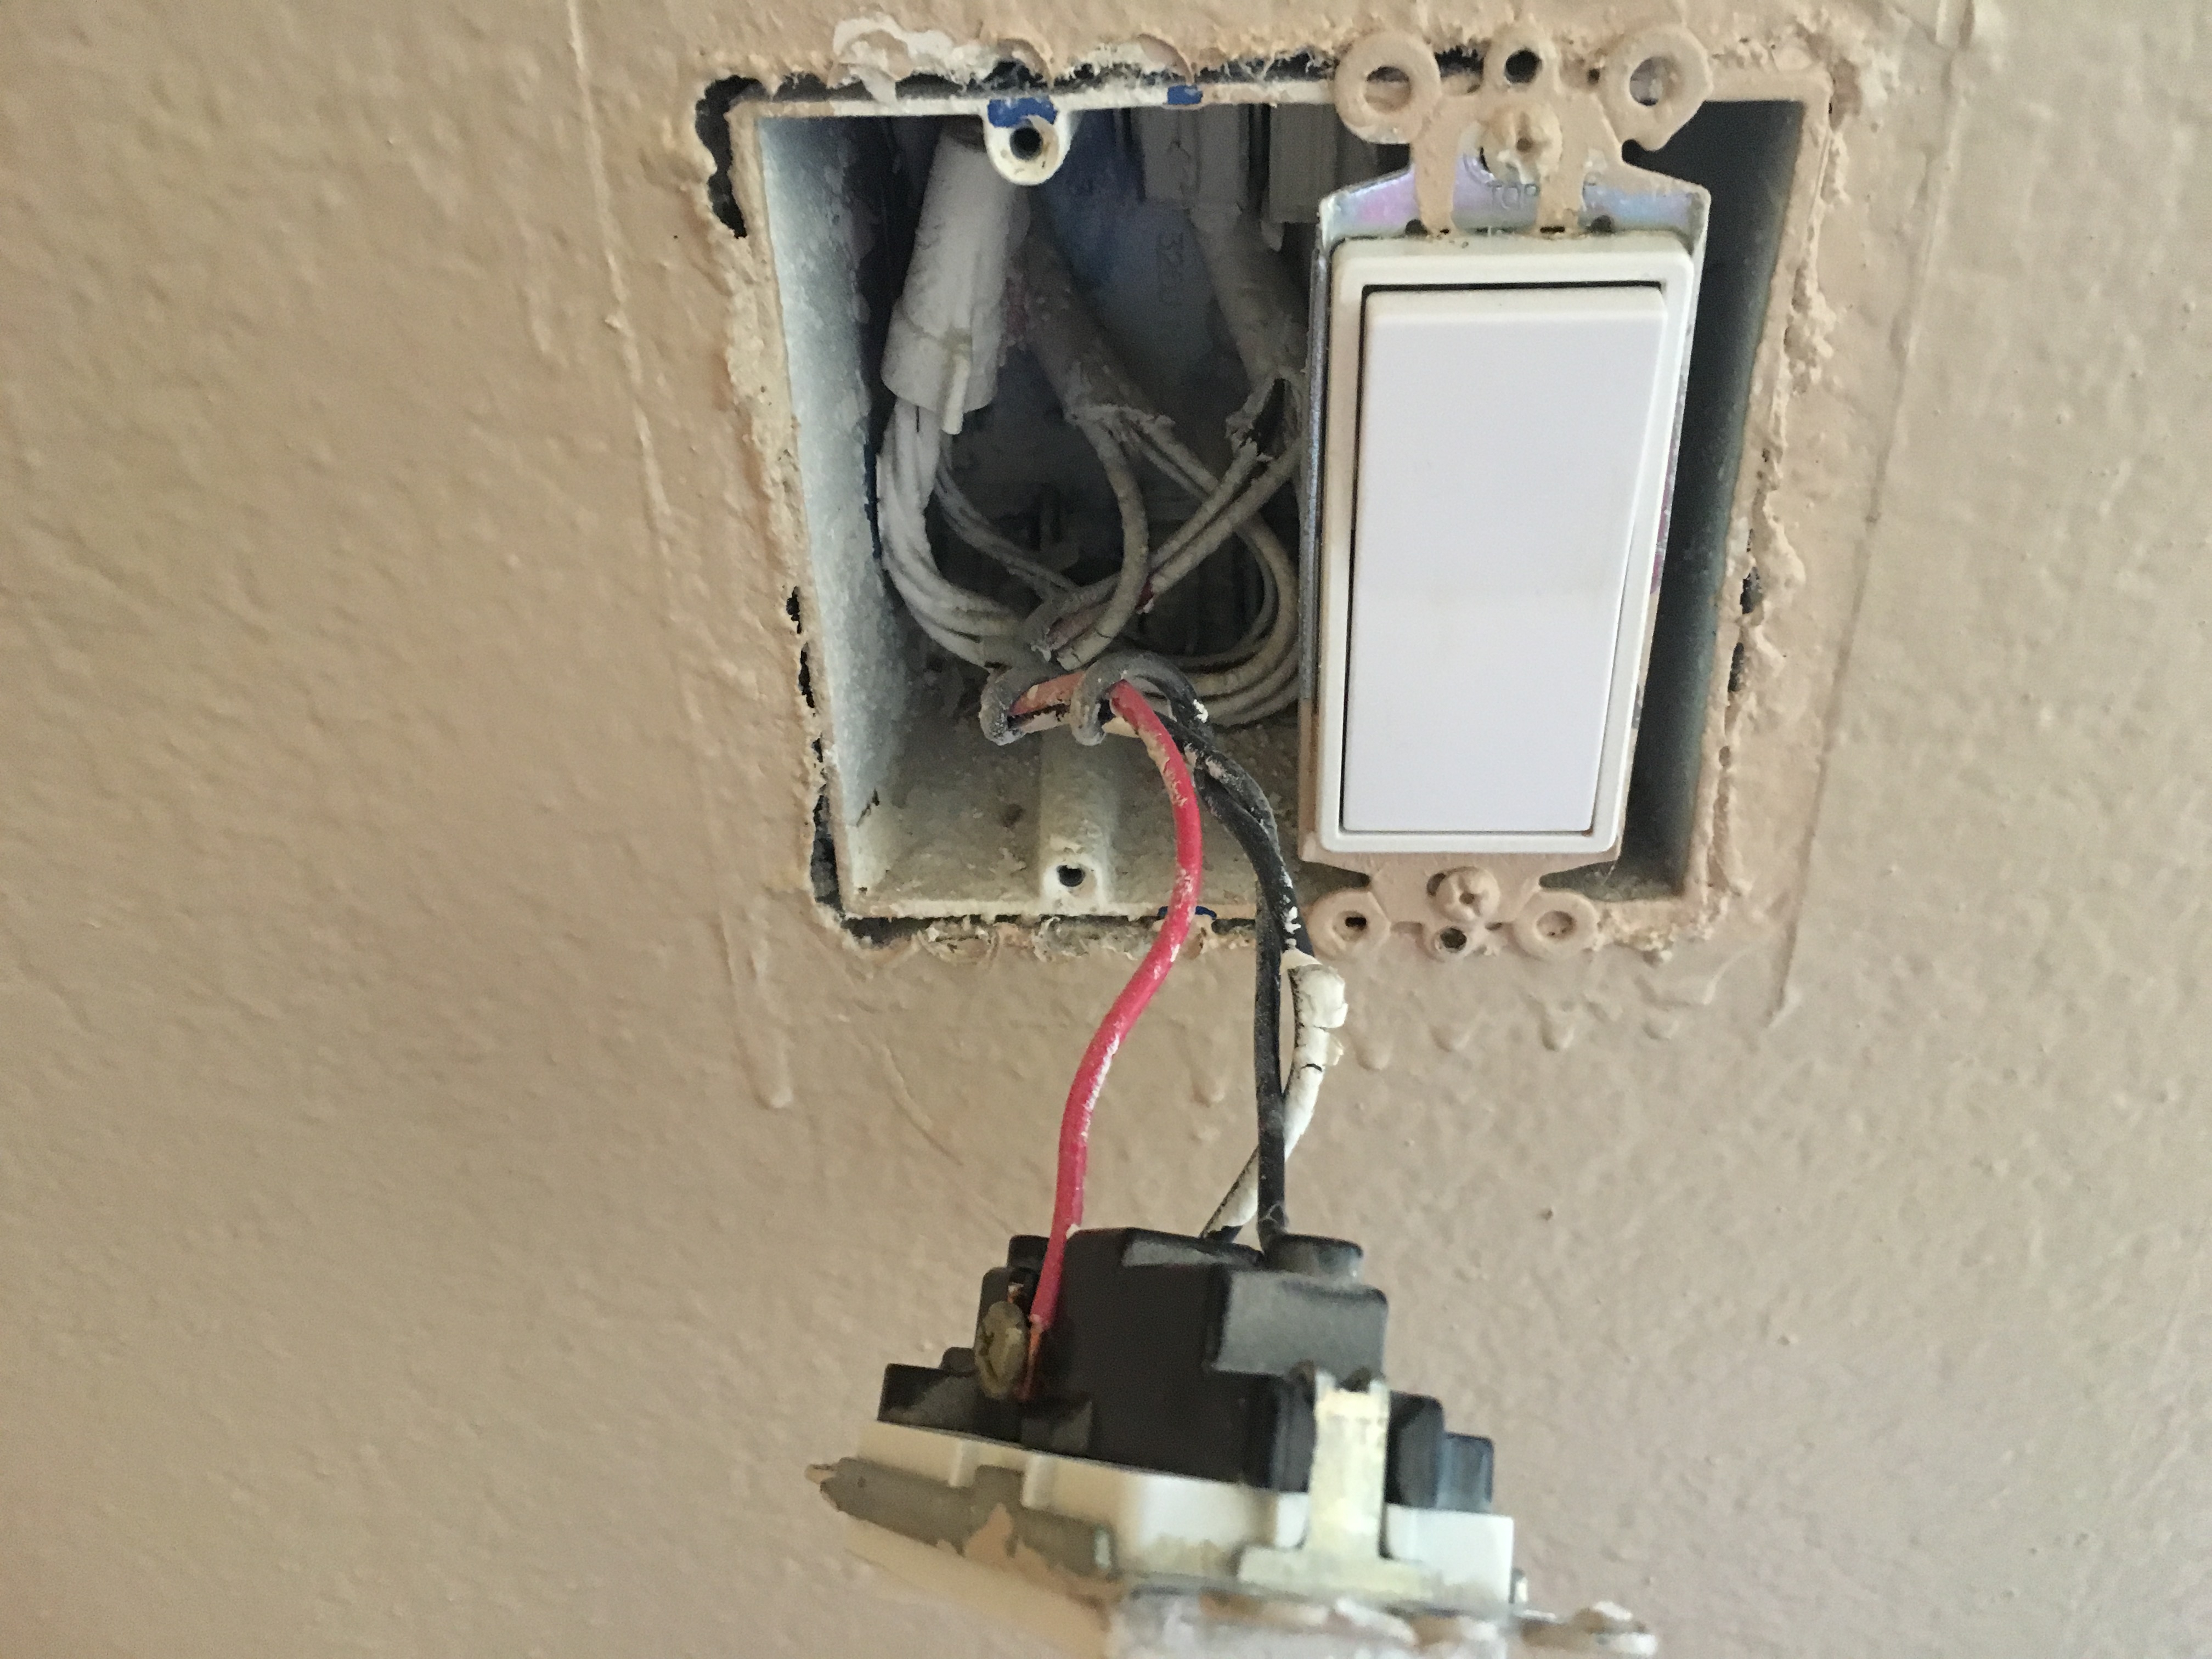 Separate Switch For Ceiling Fan And Light